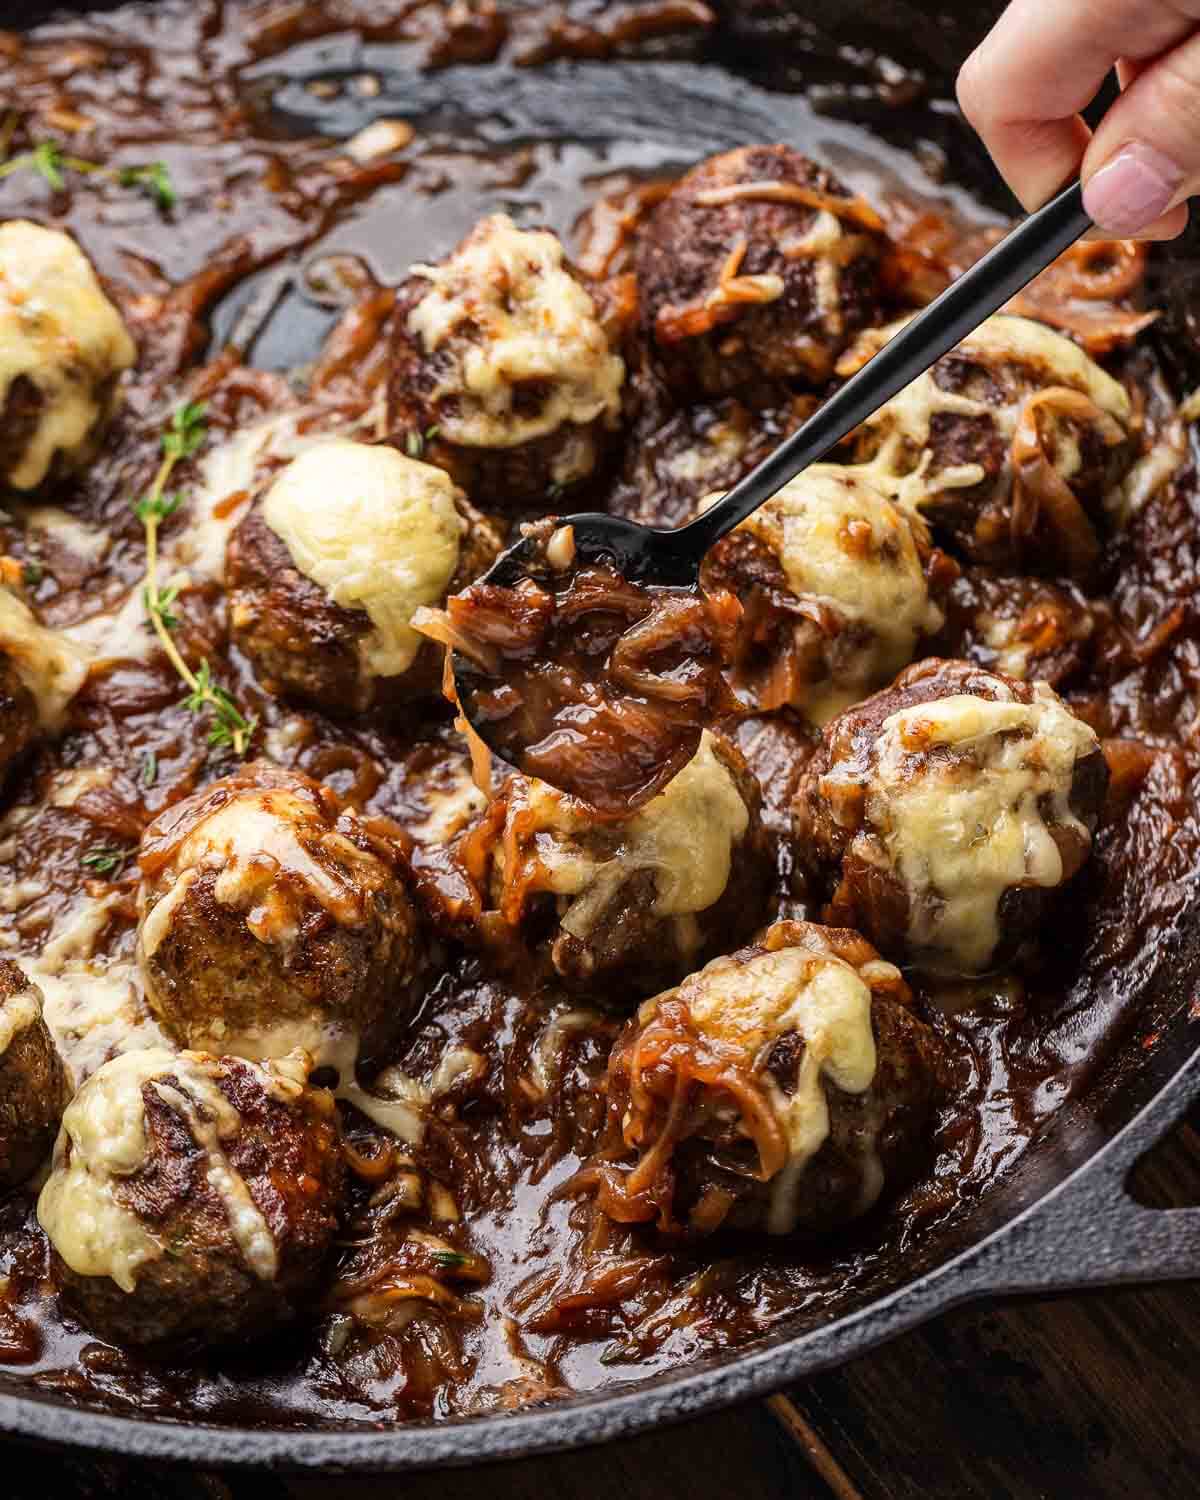 Hands holding spoonful of onions above meatballs in cast iron pan.